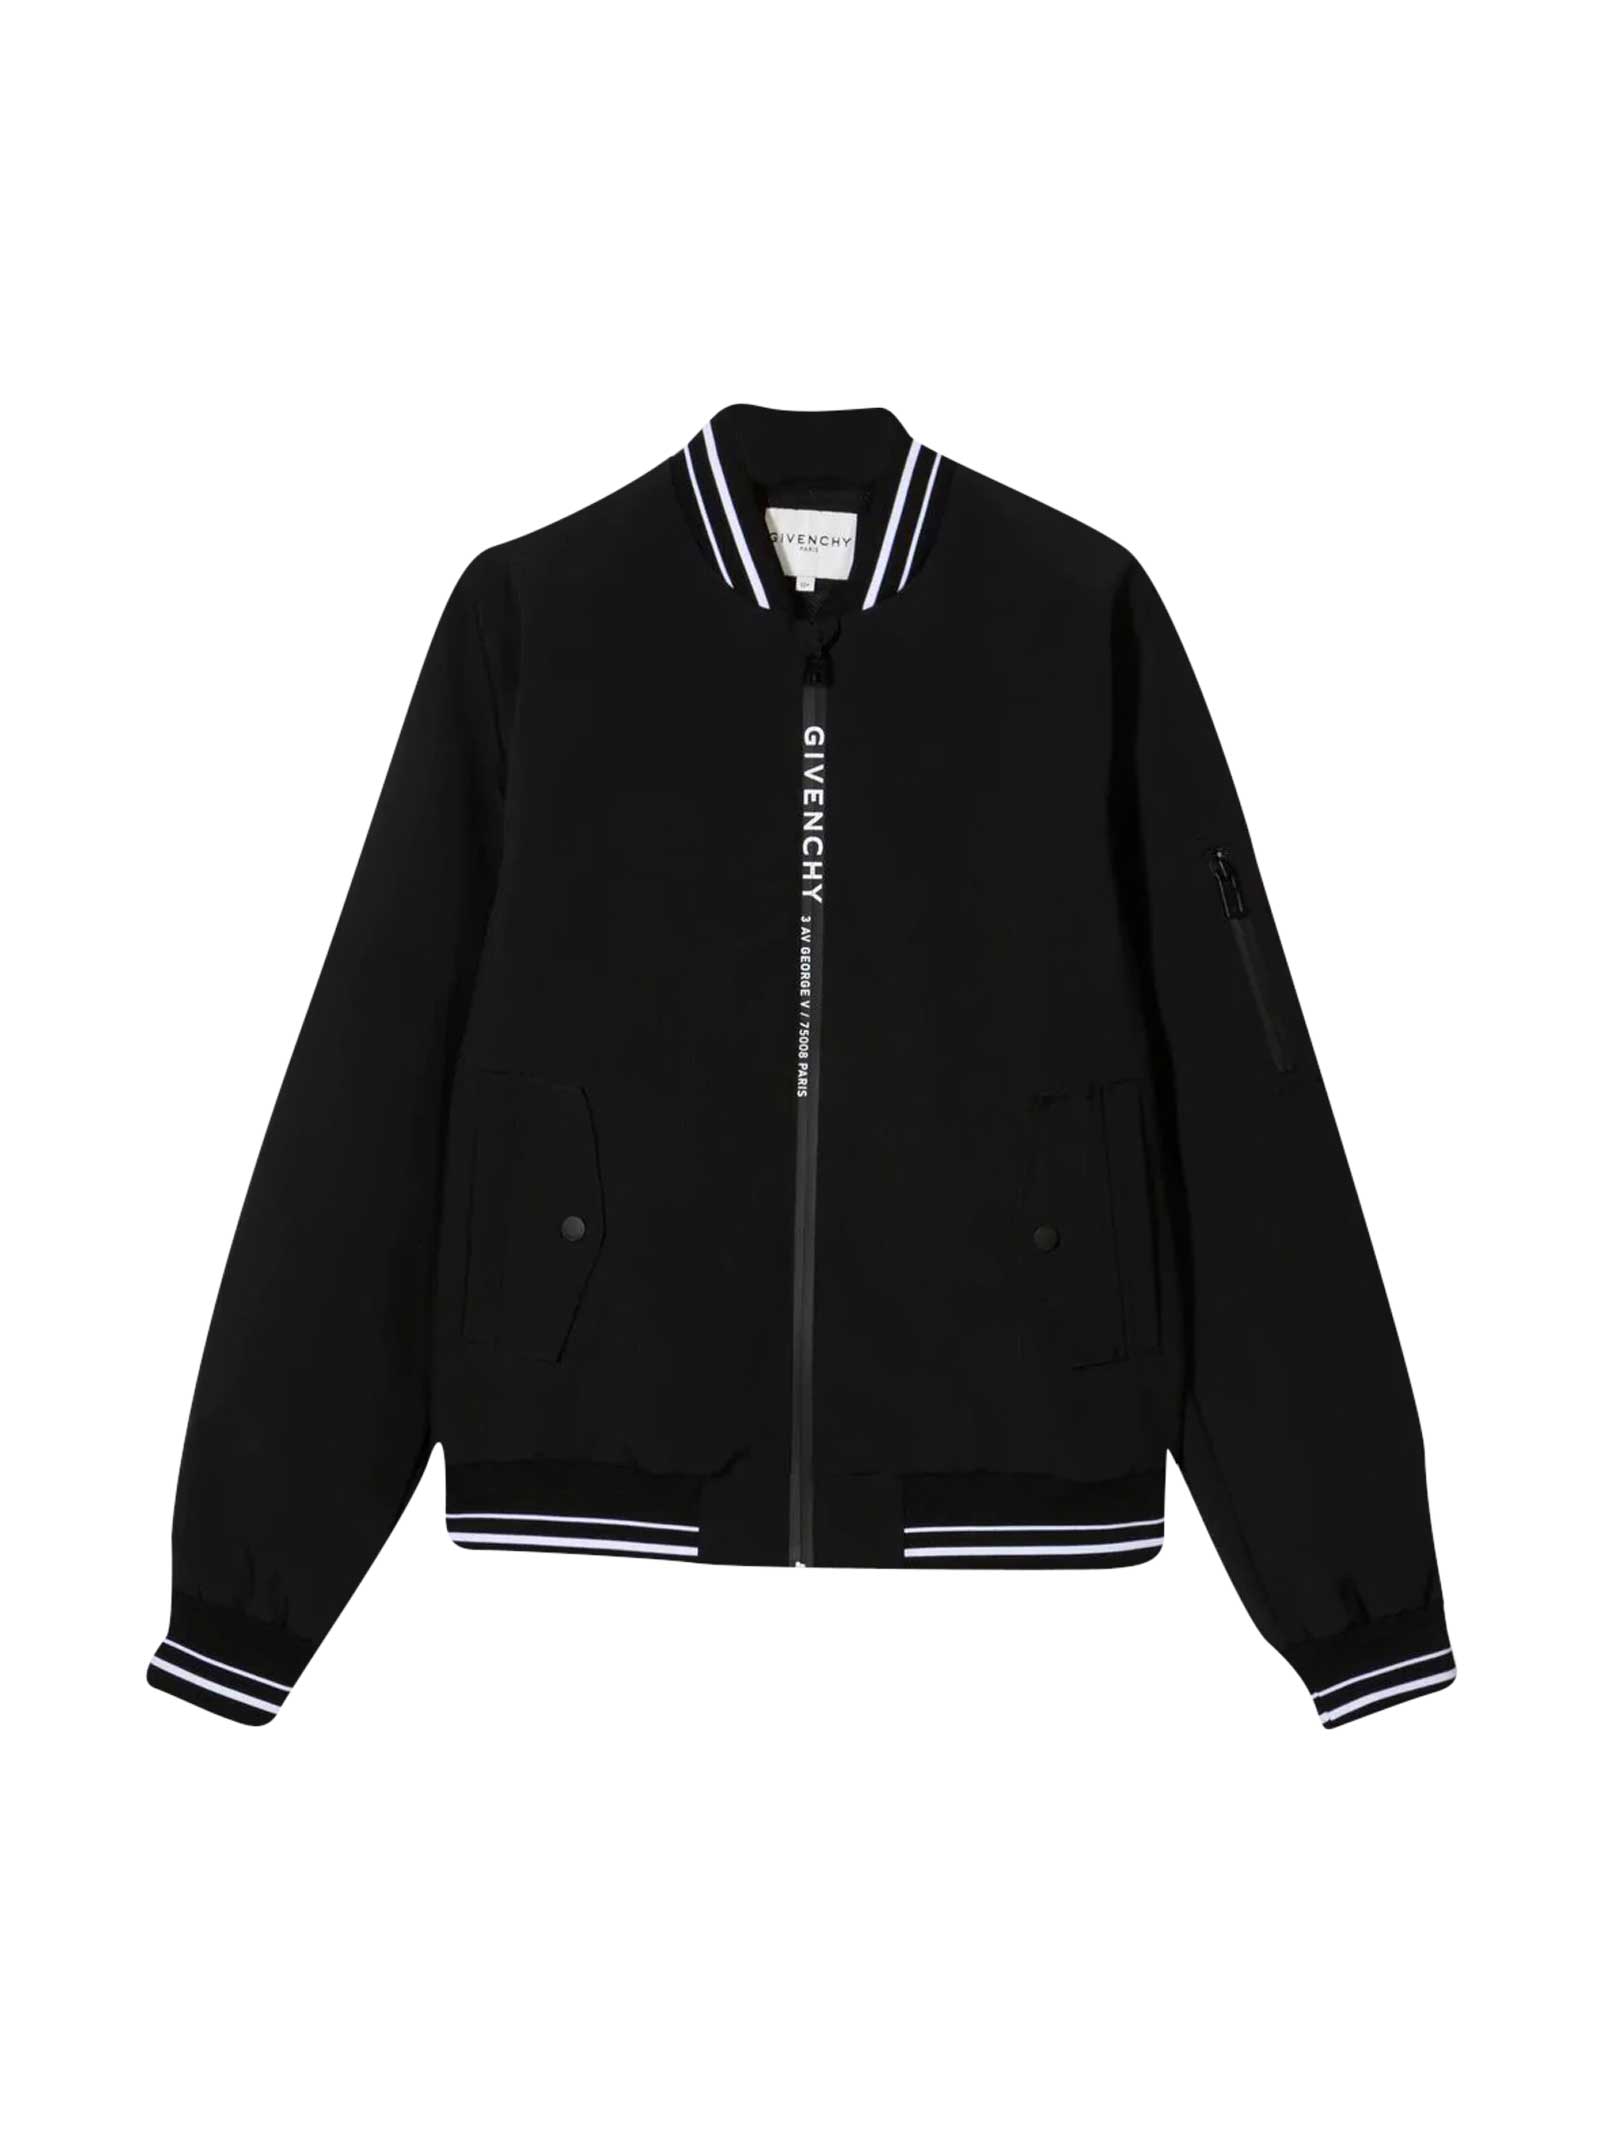 GIVENCHY BOMBER JACKET WITH PRESS,H26071 09B